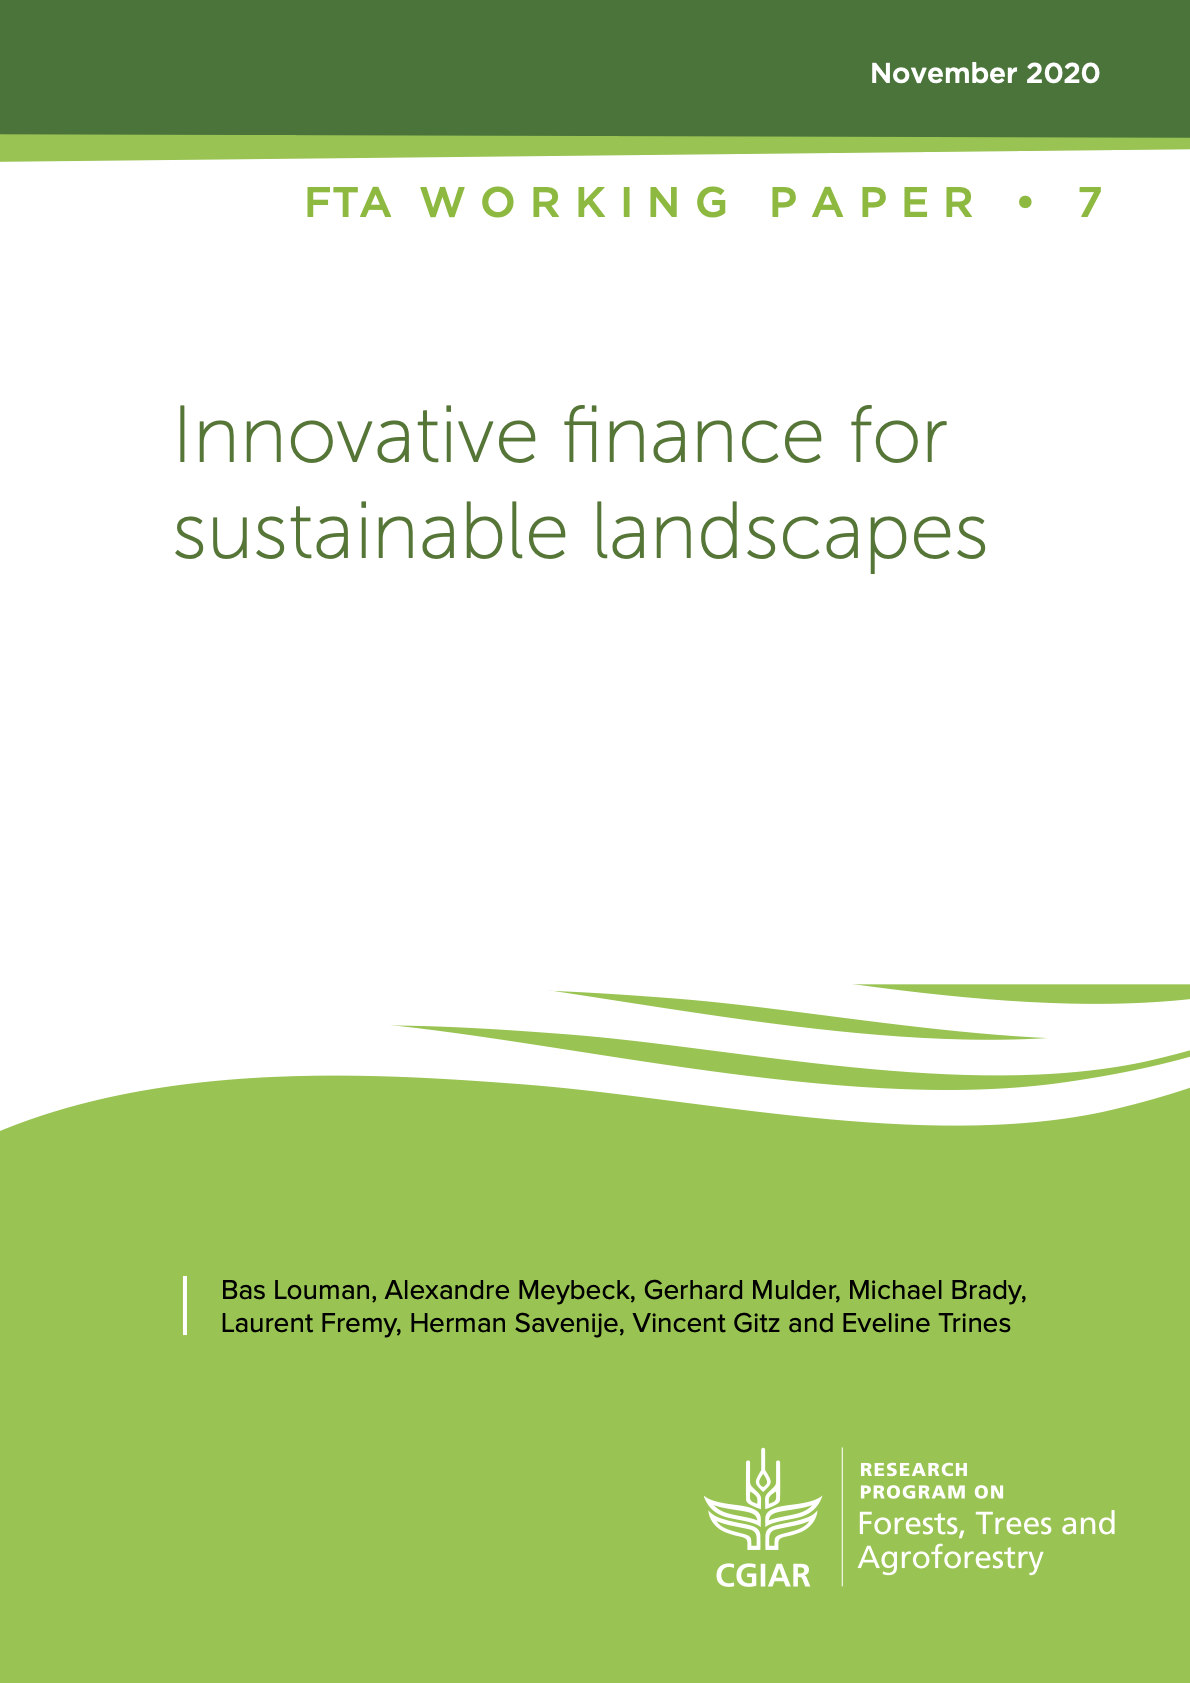 Innovative finance for sustainable landscapes - Forestry, Trees and Agroforestry Working Paper